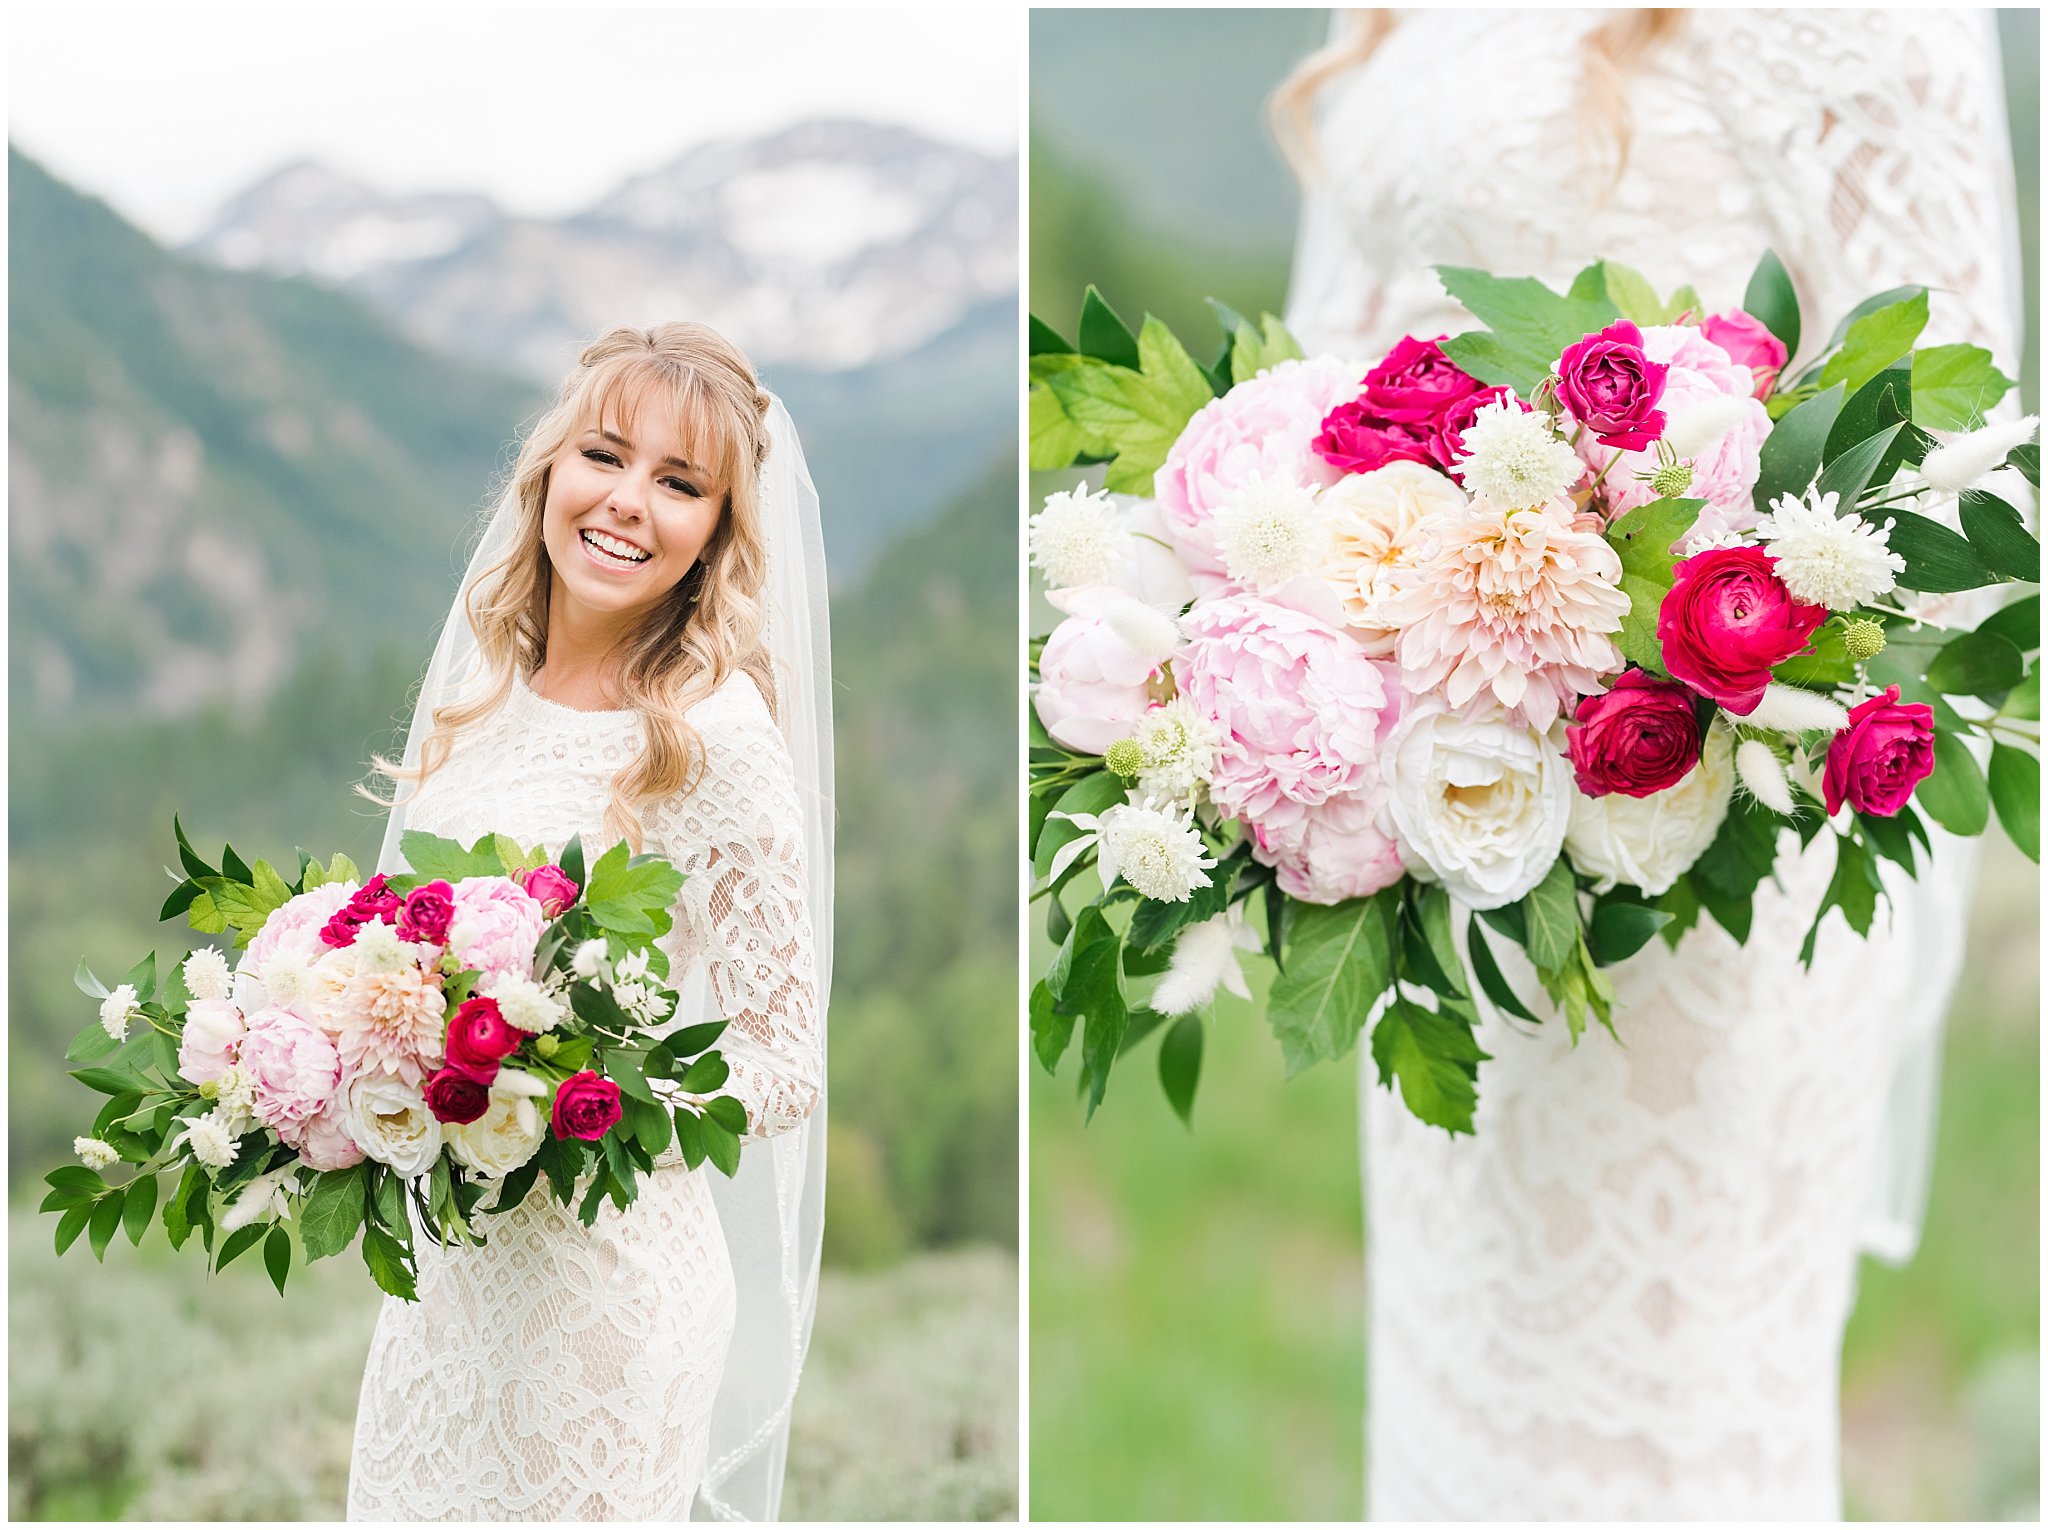 Bride in lace dress with deep pink and white floral bouquet | Utah Mountain Wedding Formal Session | Tibble Fork Summer Formal Session | Jessie and Dallin Photography